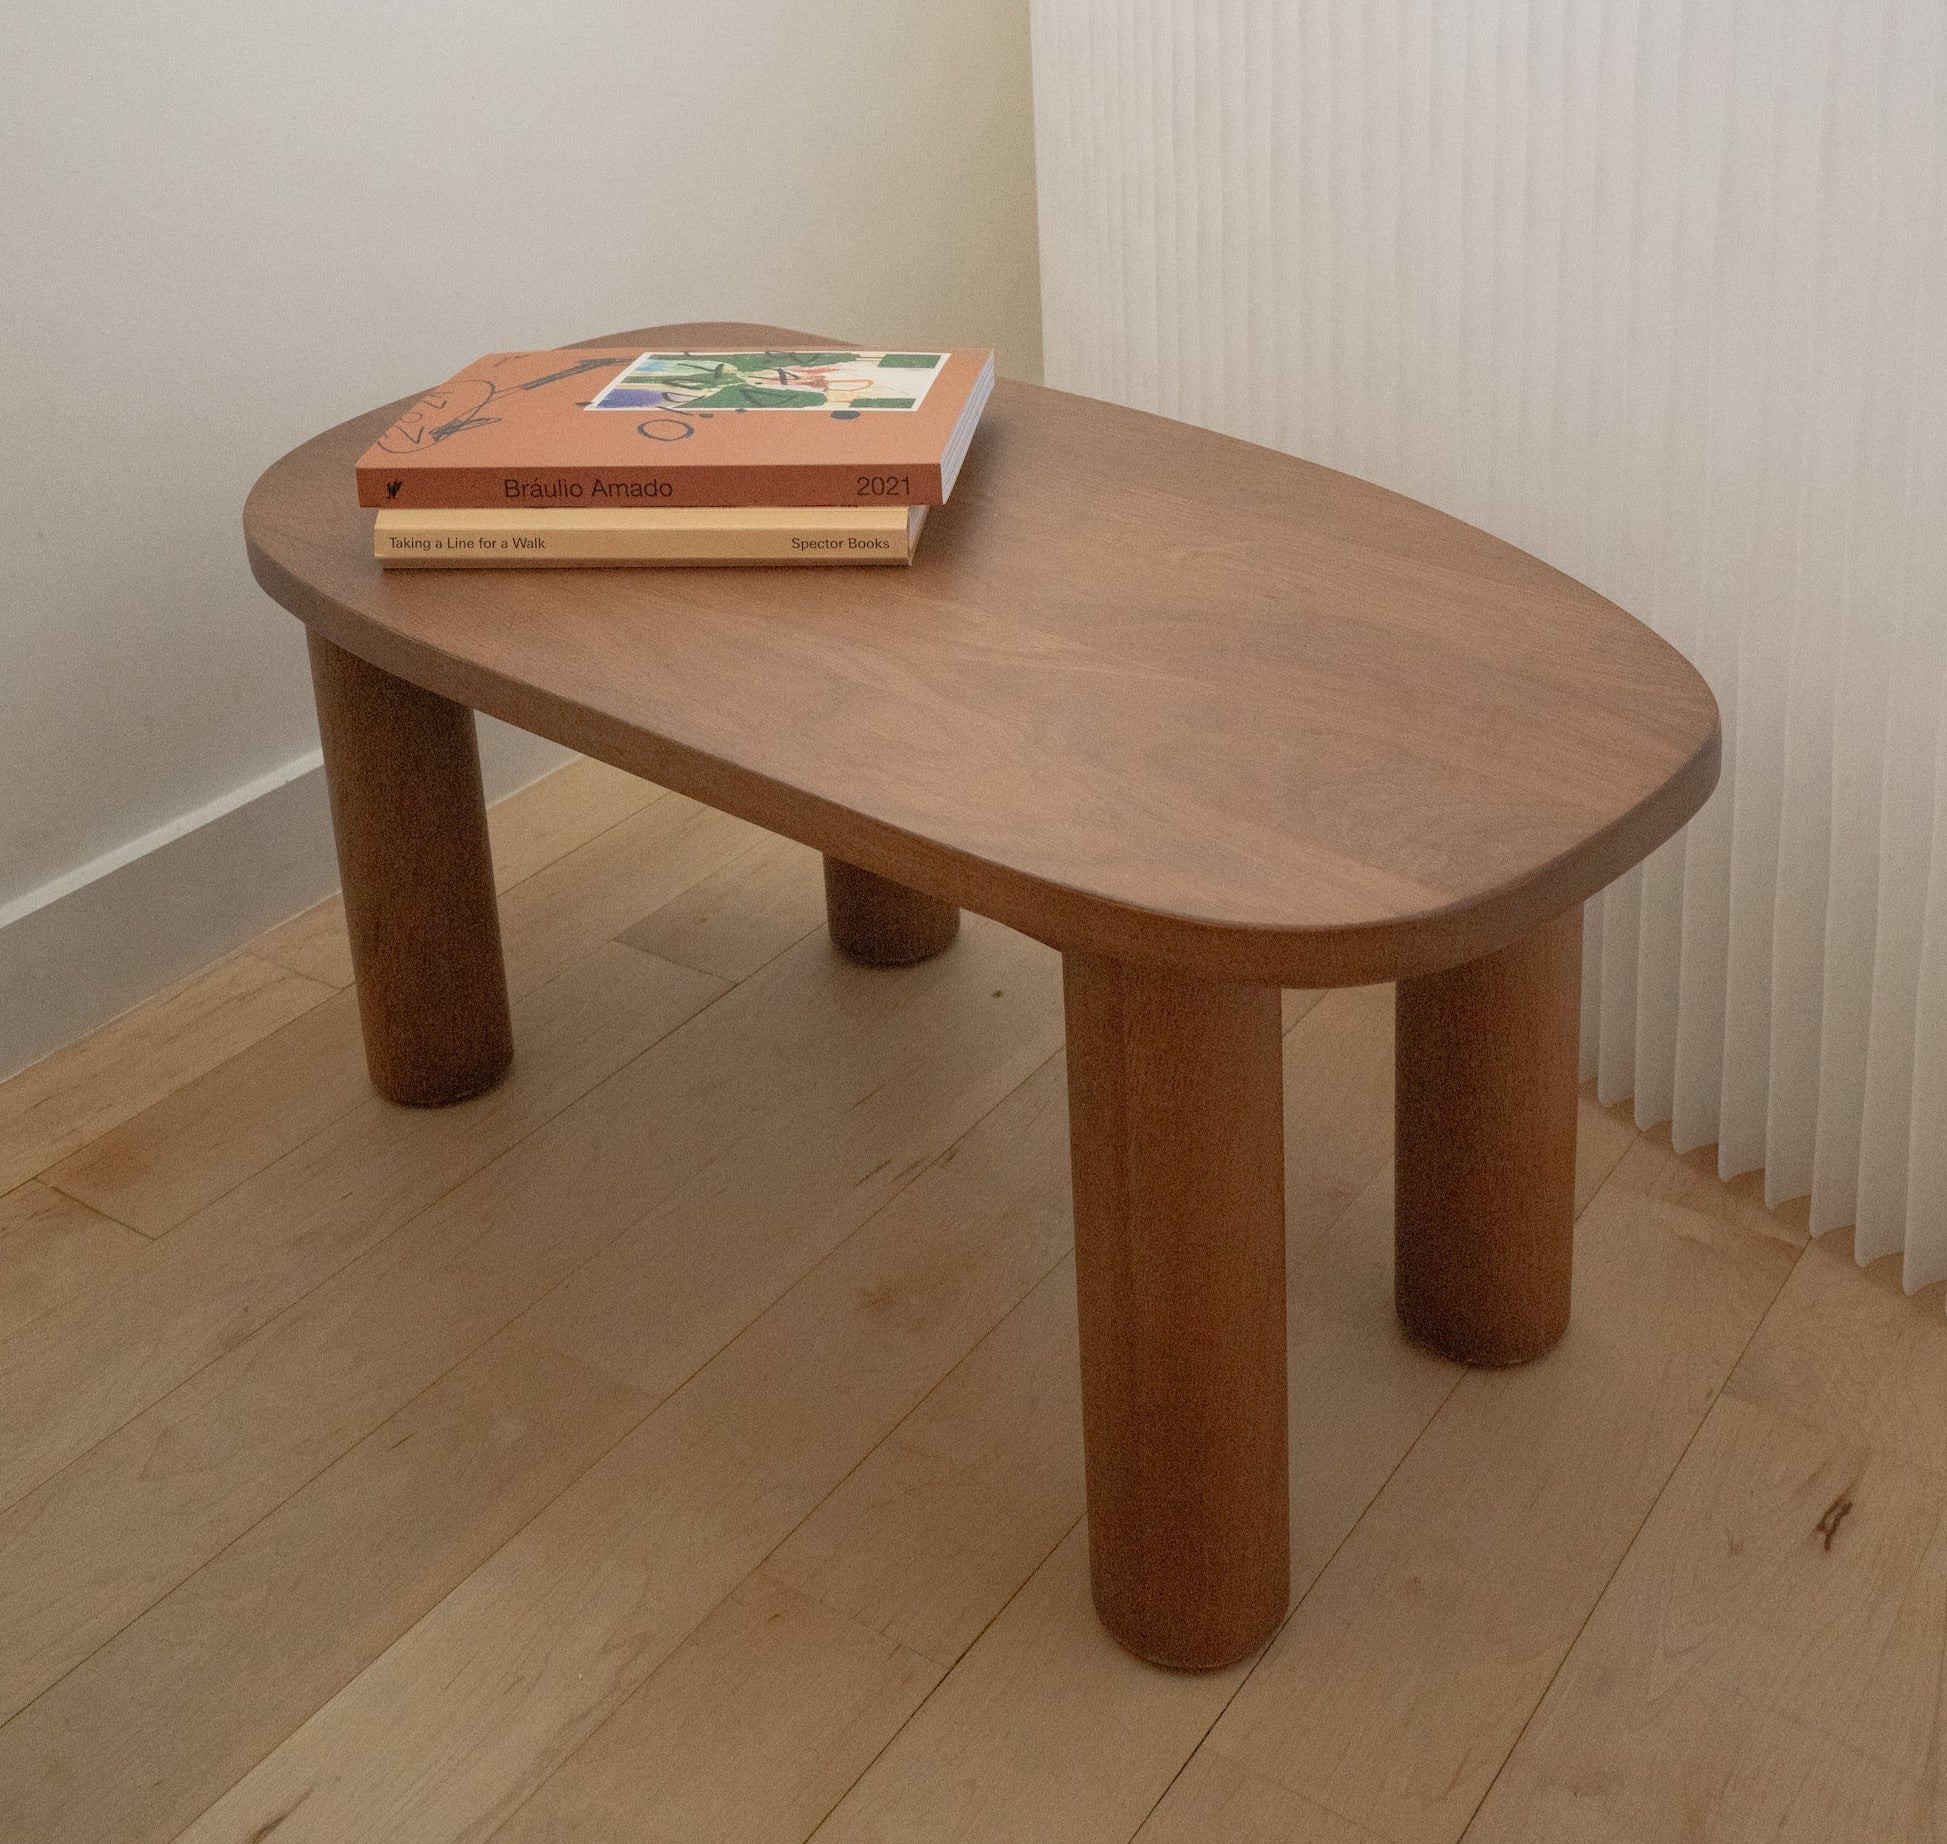 a wooden table with two books on top of it